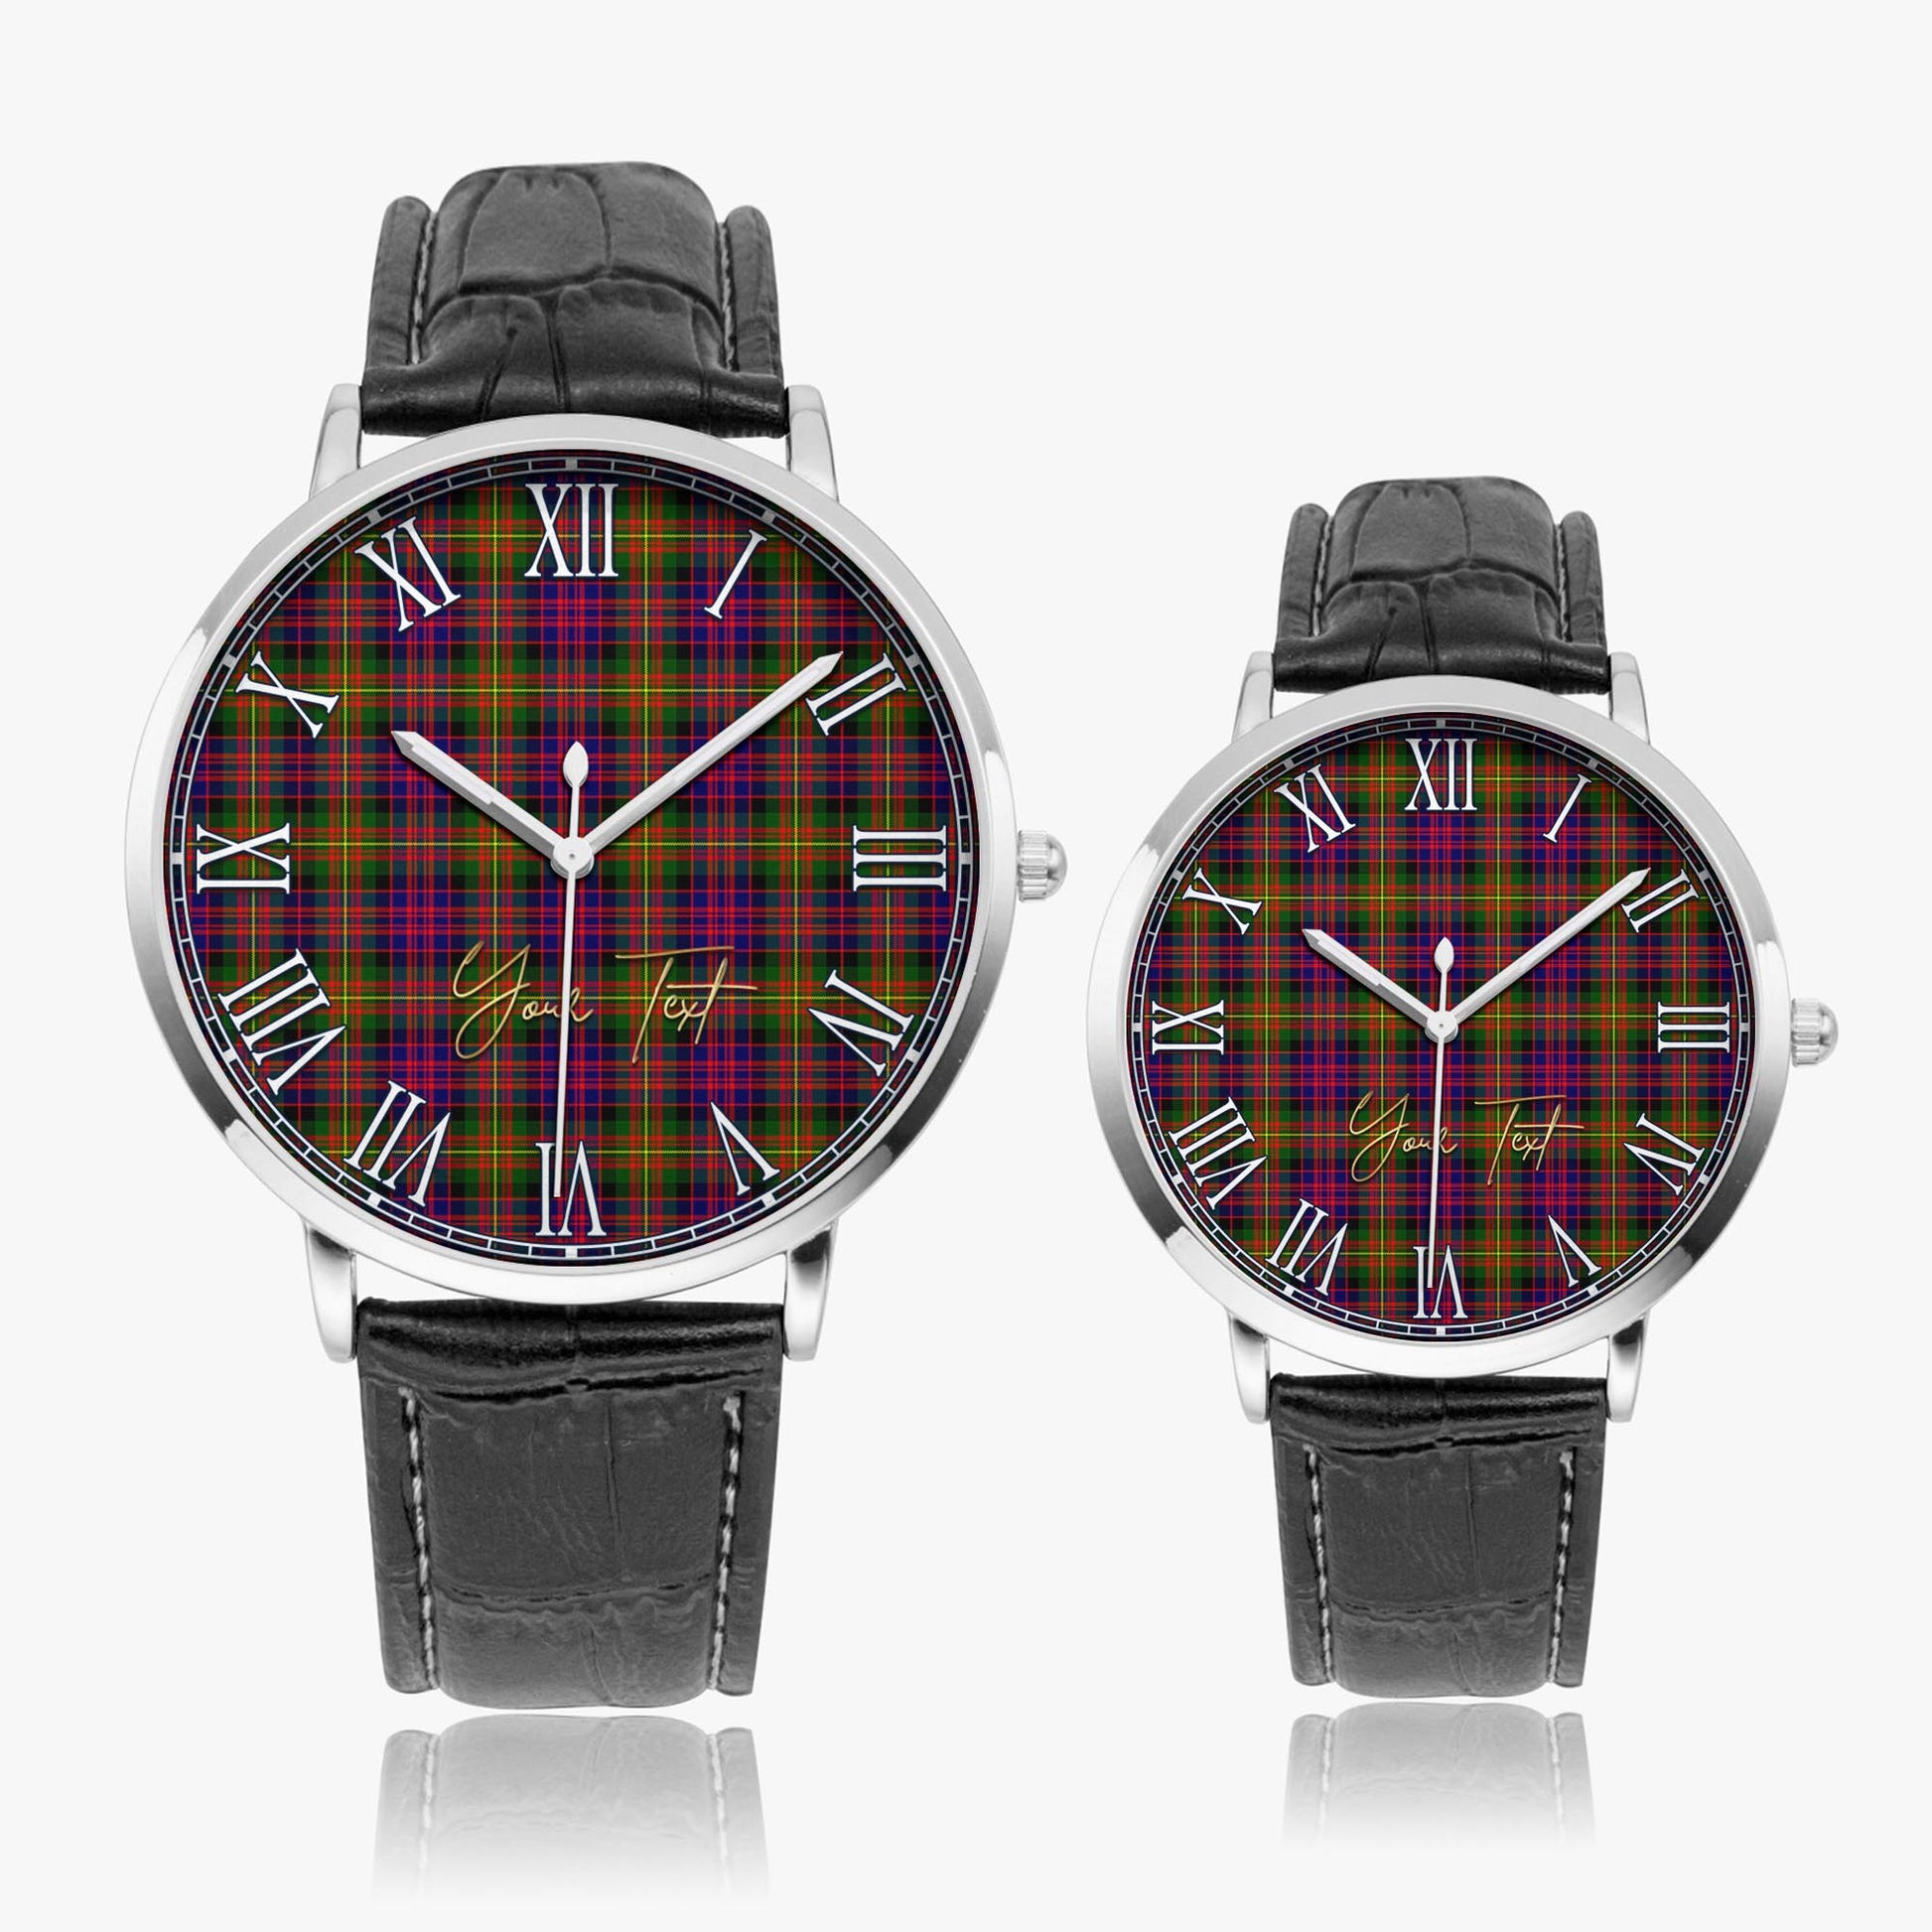 Carnegie Modern Tartan Personalized Your Text Leather Trap Quartz Watch Ultra Thin Silver Case With Black Leather Strap - Tartanvibesclothing